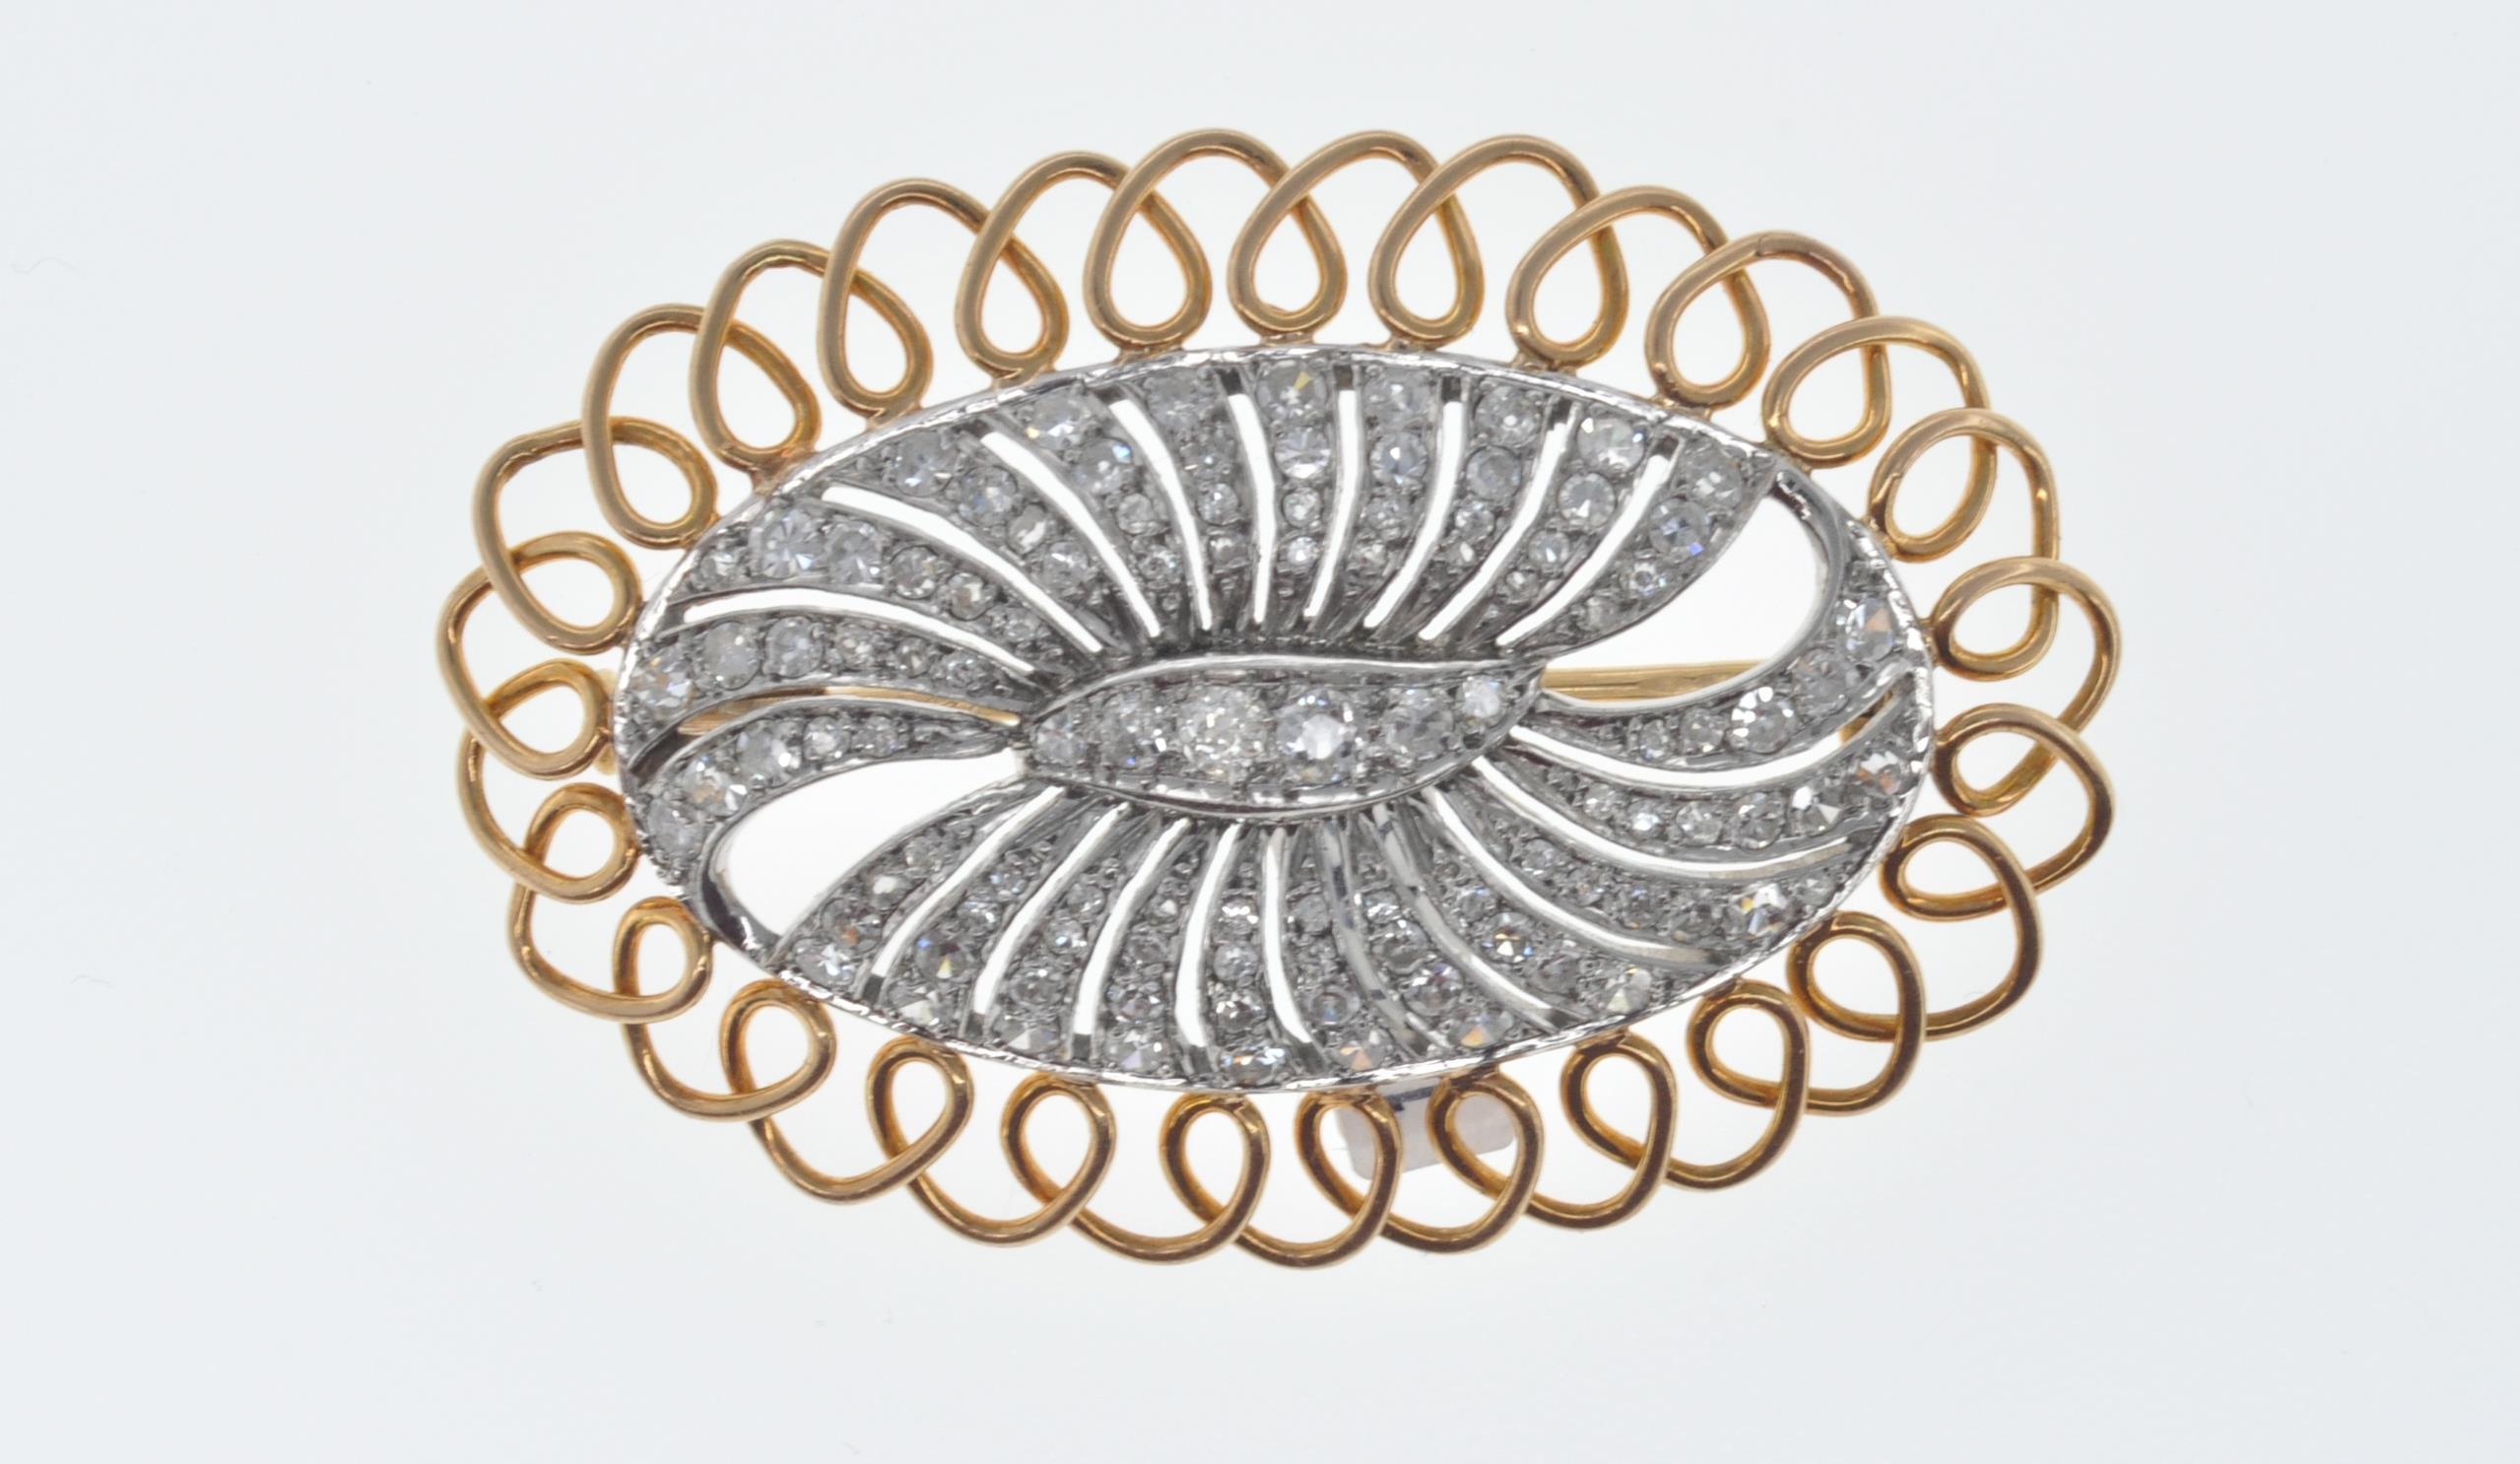 VINTAGE GOLD AND DIAMOND OVAL BROOCH - Image 2 of 6